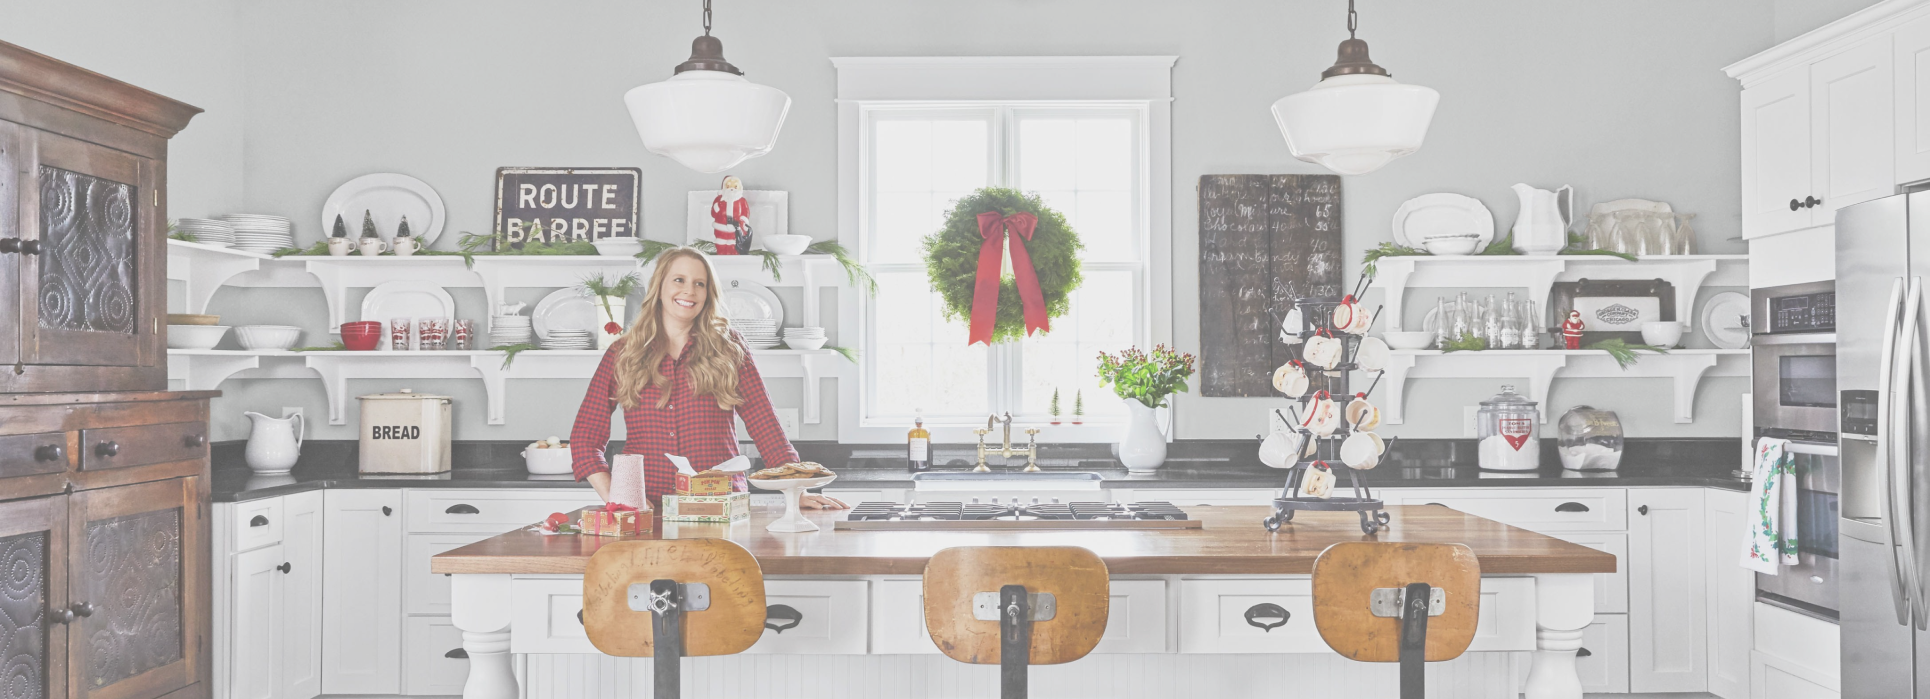 How to Create a Festive Smart Home for Christmas: A Guide Featuring